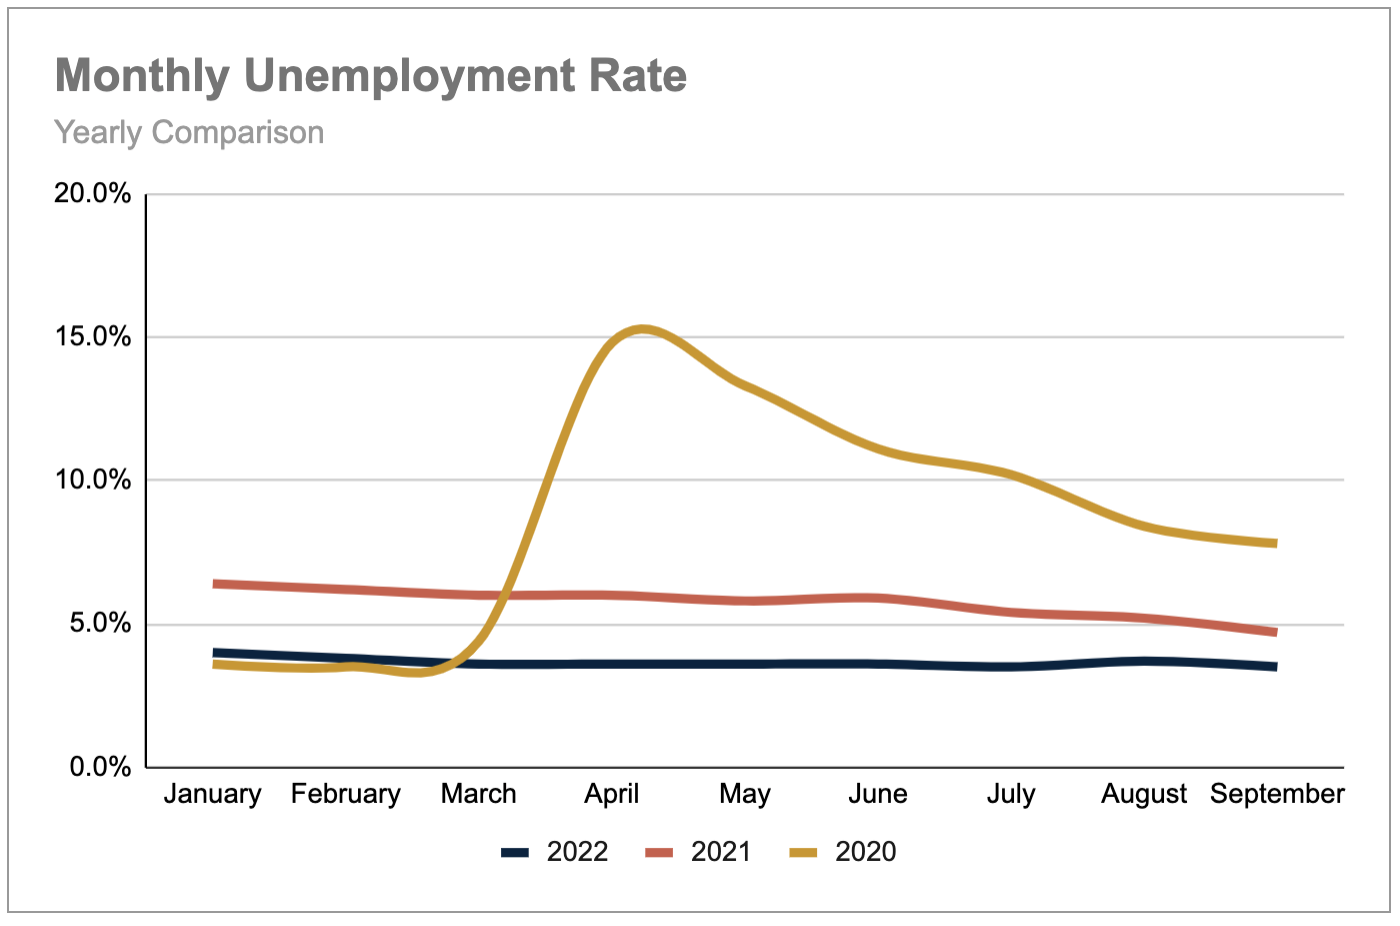 Monthly unemployment rate, yearly comparison